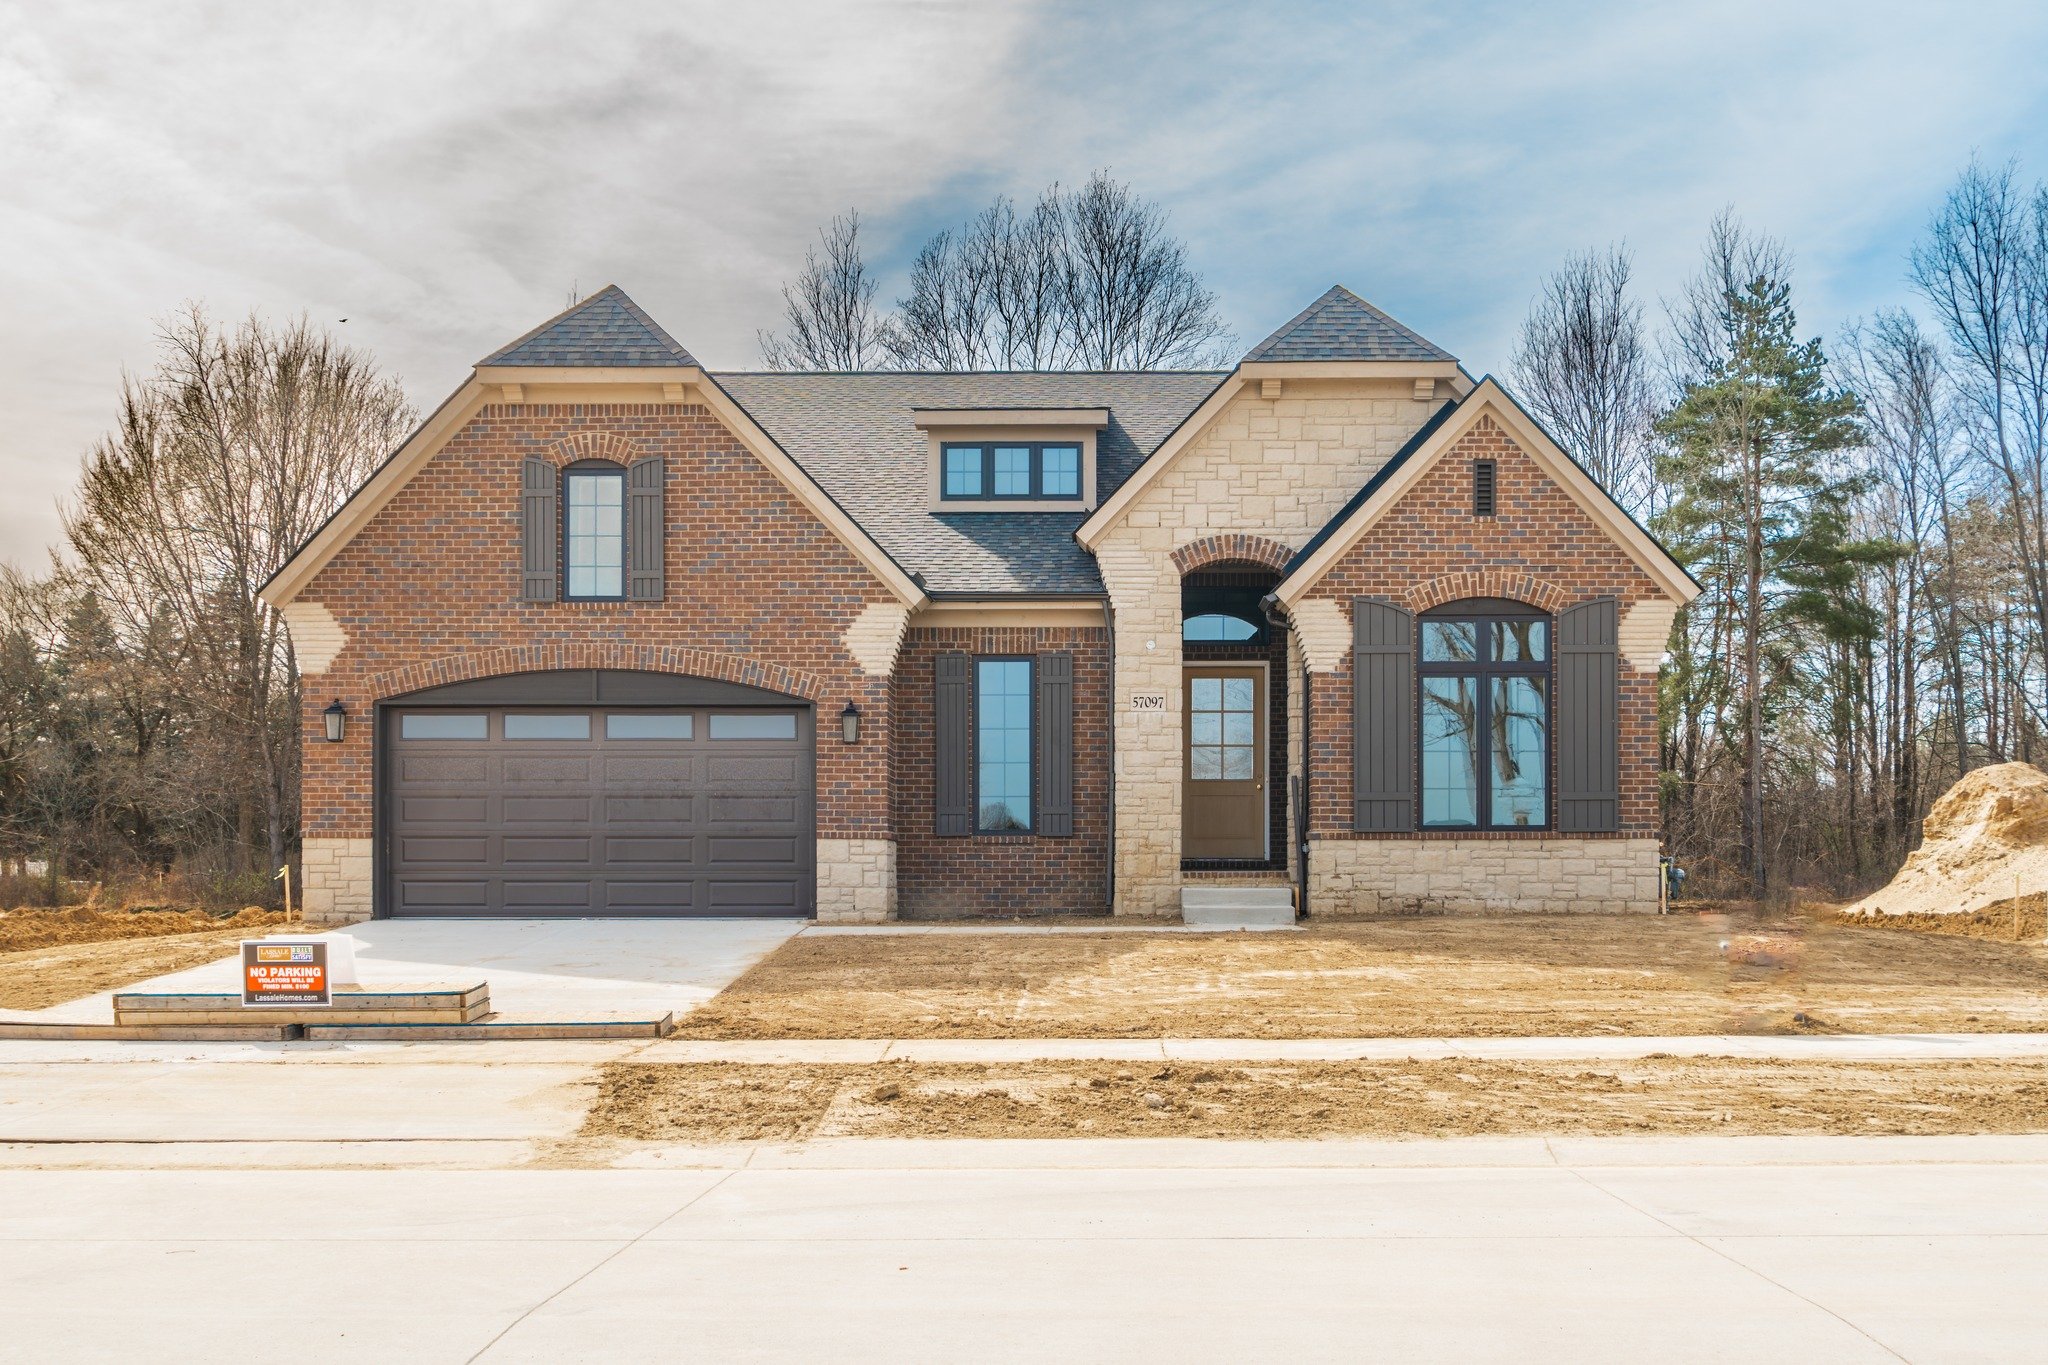 ⏱️Est. Completion Date: May 2024
📍57097 Meadowridge in Washington Twp

$889,900.00
⭐️ 3 🛌 3.5 🛁
⭐️ En Suite Loft
⭐️ 2,583 Sqft
⭐️ Covered Loggia
⭐️ Kitchen Appliances Included
⭐️ Sod, Sprinklers and front landscaping included

A Ranch Villa with a